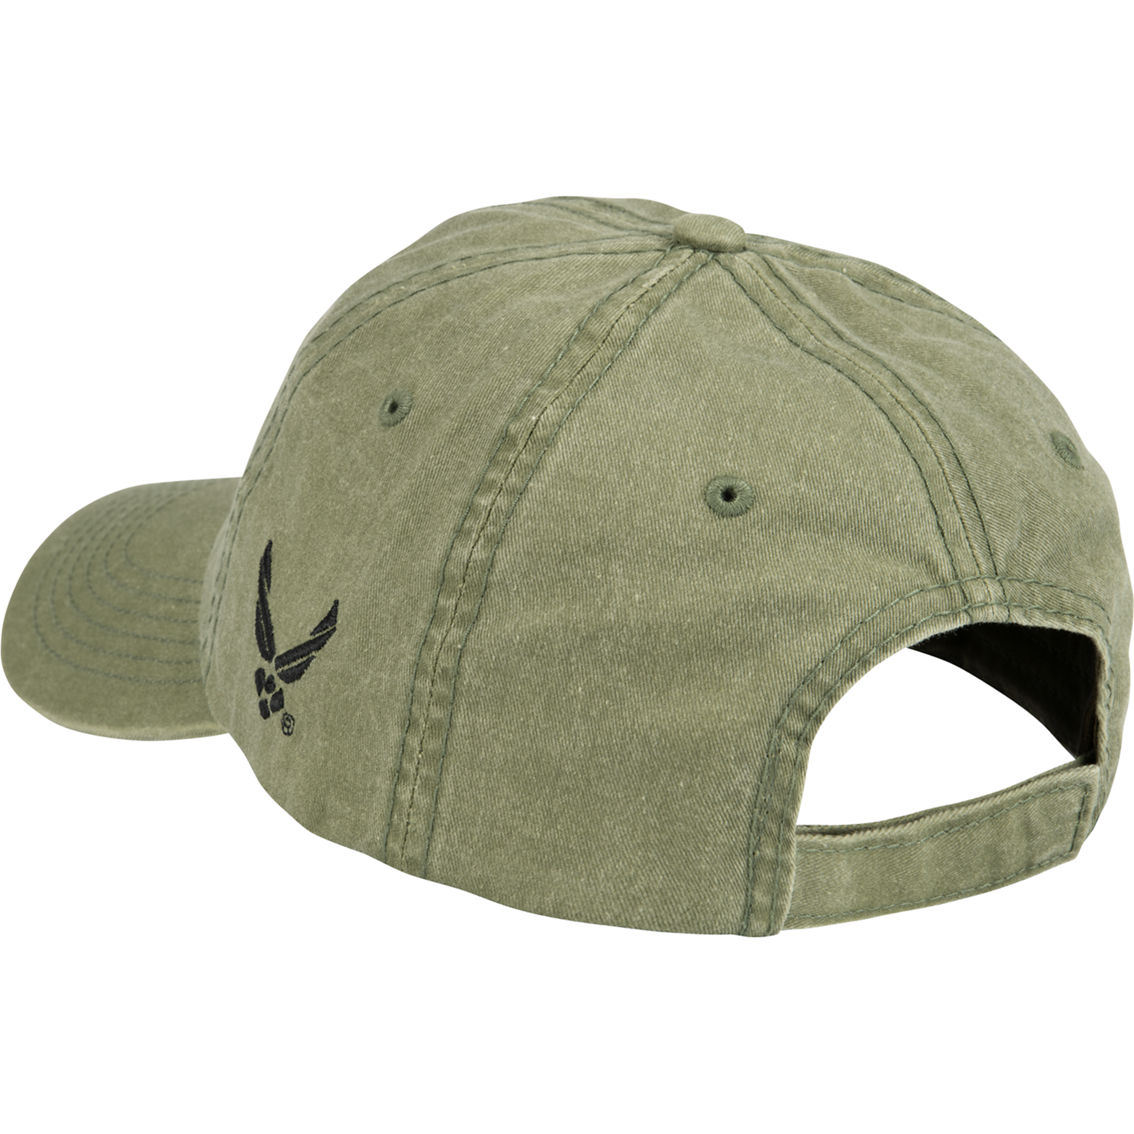 Blync Olive Air Force Washed Twill Flag Cap - Image 3 of 3